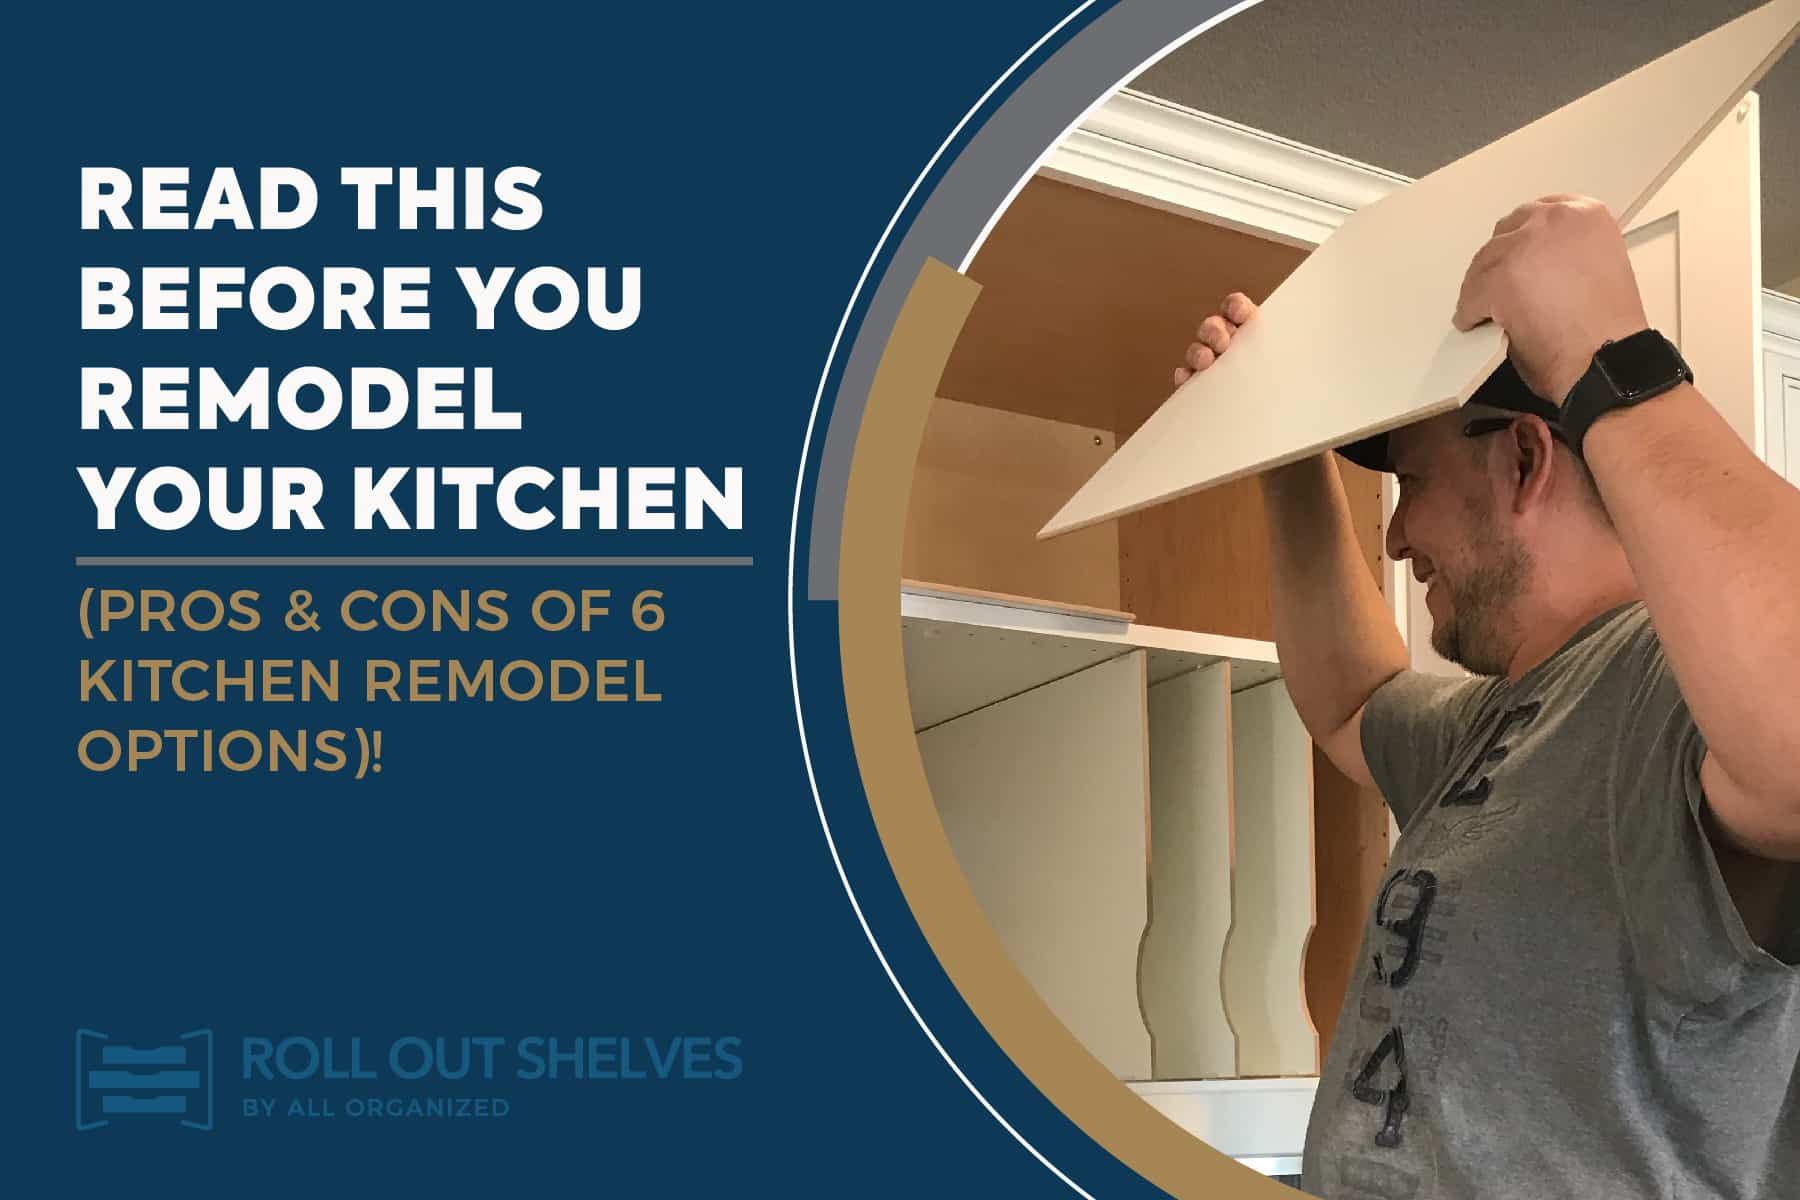 Read This Before You Remodel Your Kitchen (pros & cons of 6 kitchen remodel options)! 22